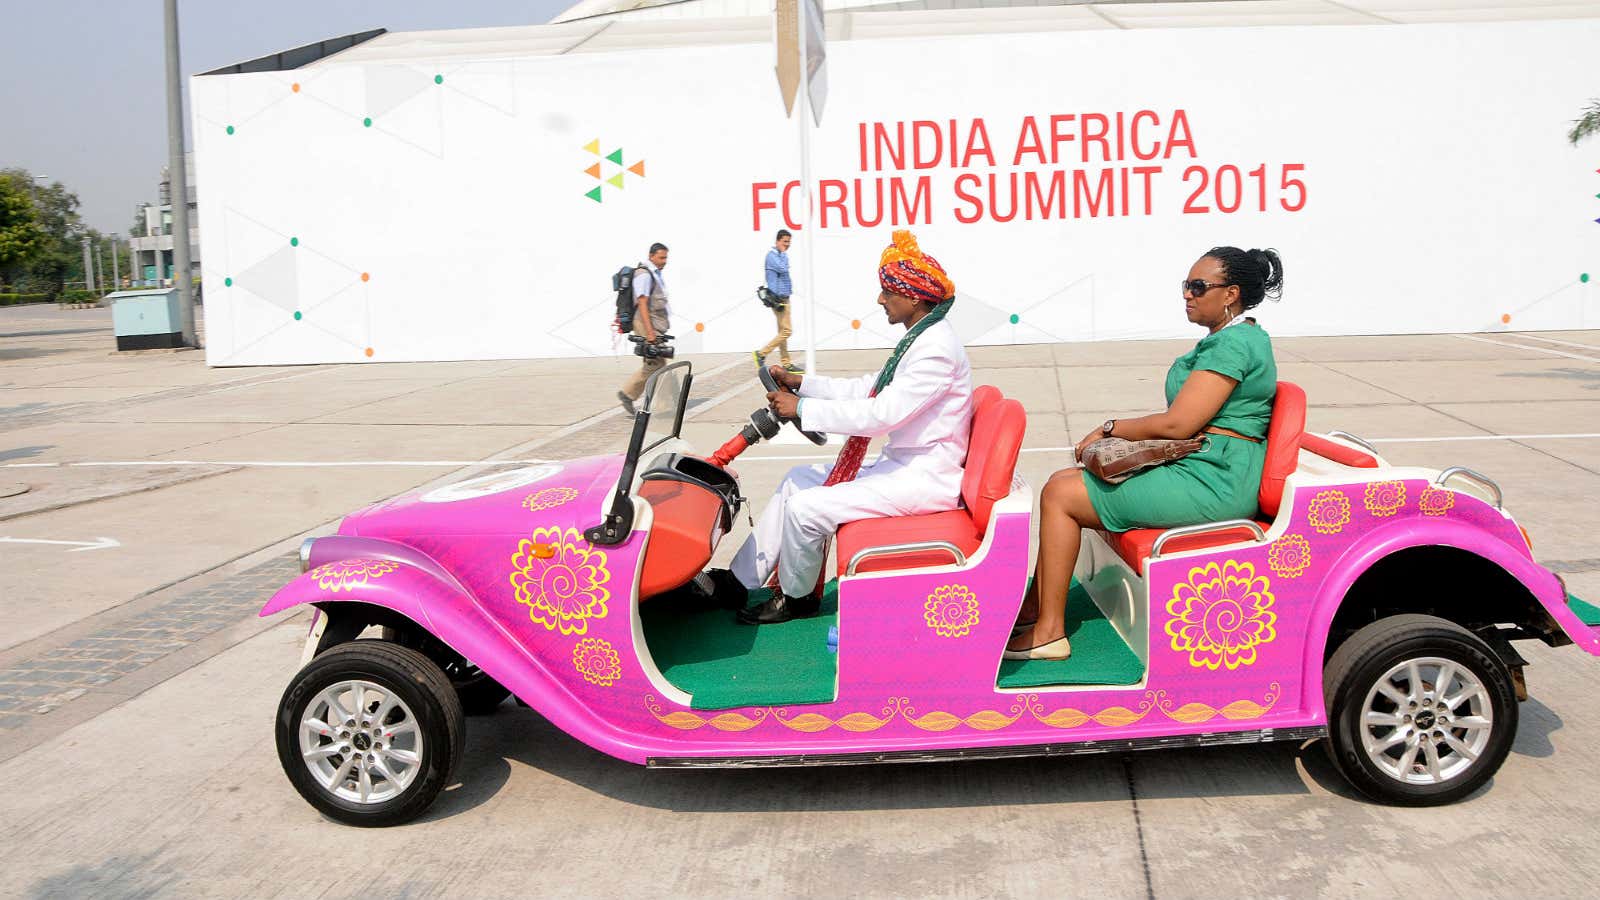 Not every African gets this kind of a welcome in India.